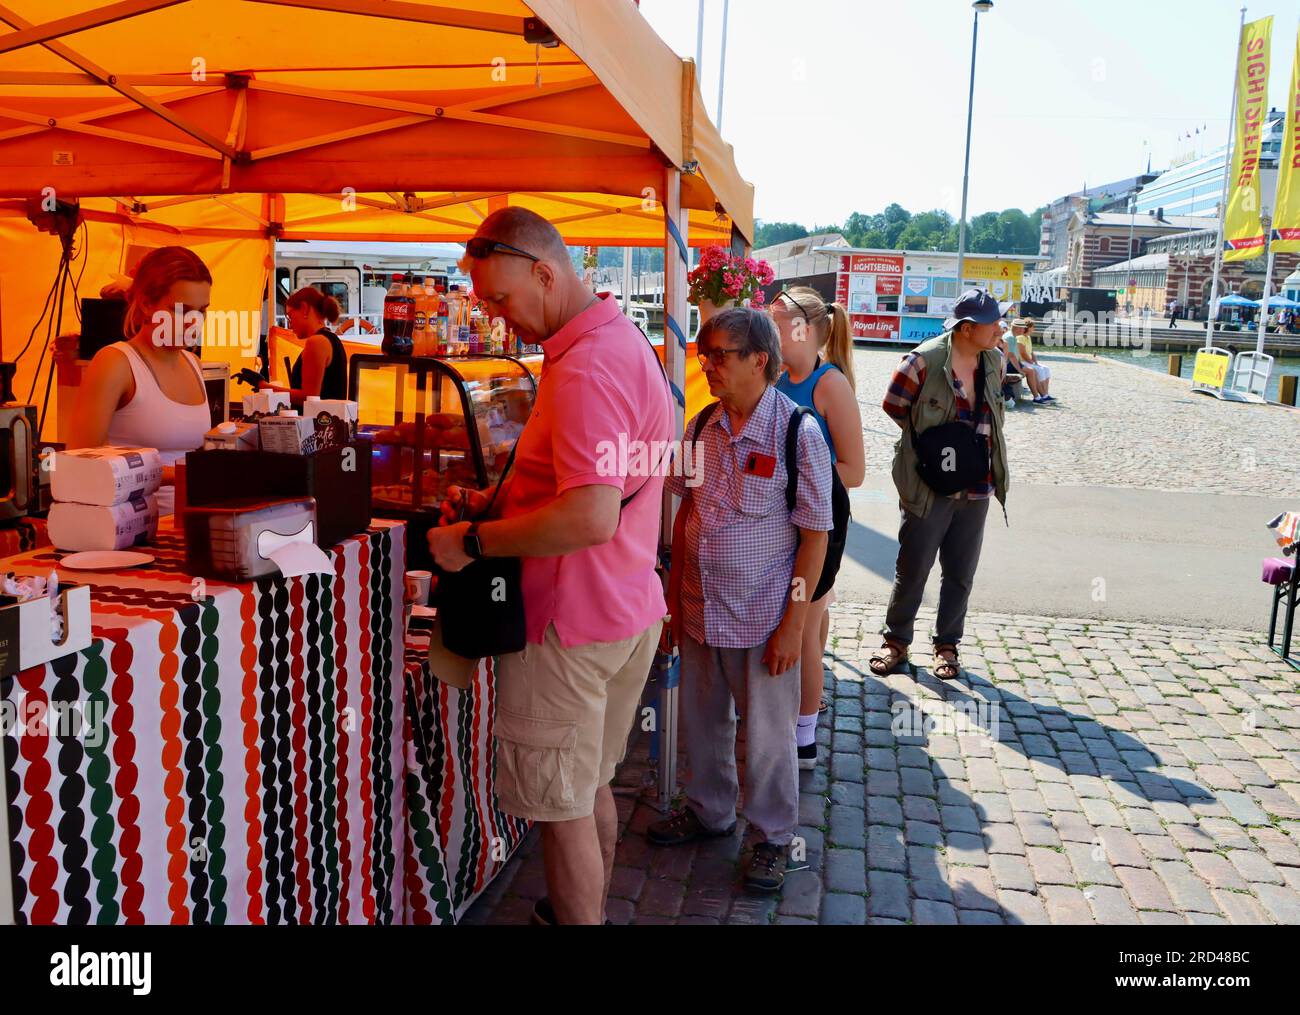 Fruit, berries and vegetables for sale at the Market Square, Kauppatori, at Helsinki Harbor in Finland Stock Photo